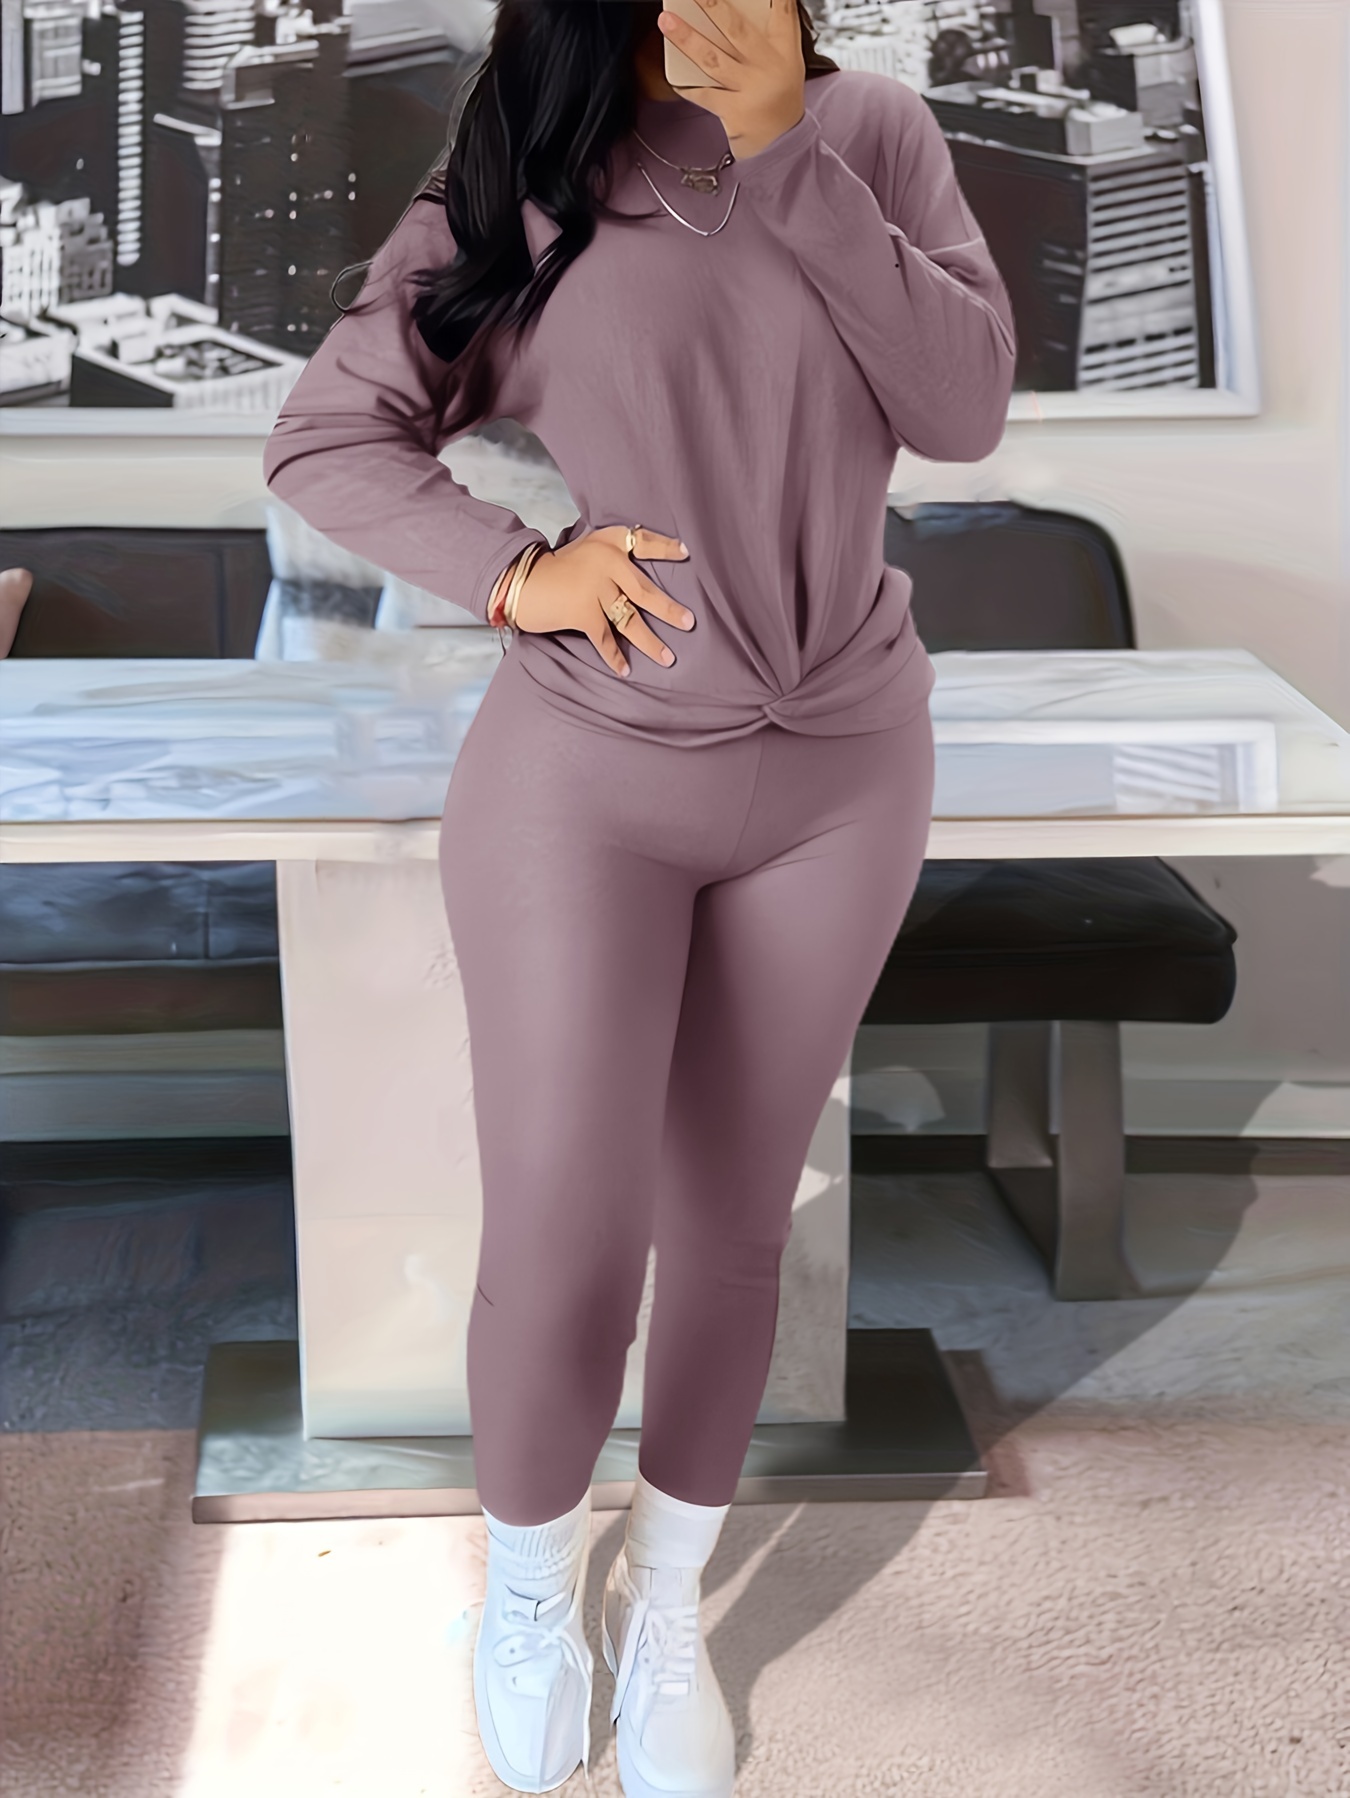 Plus Size Basic Outfits Set, Women's Plus Solid Lace Up Side Short Sleeve  Round Neck Top & Leggings Outfits Two Piece Set